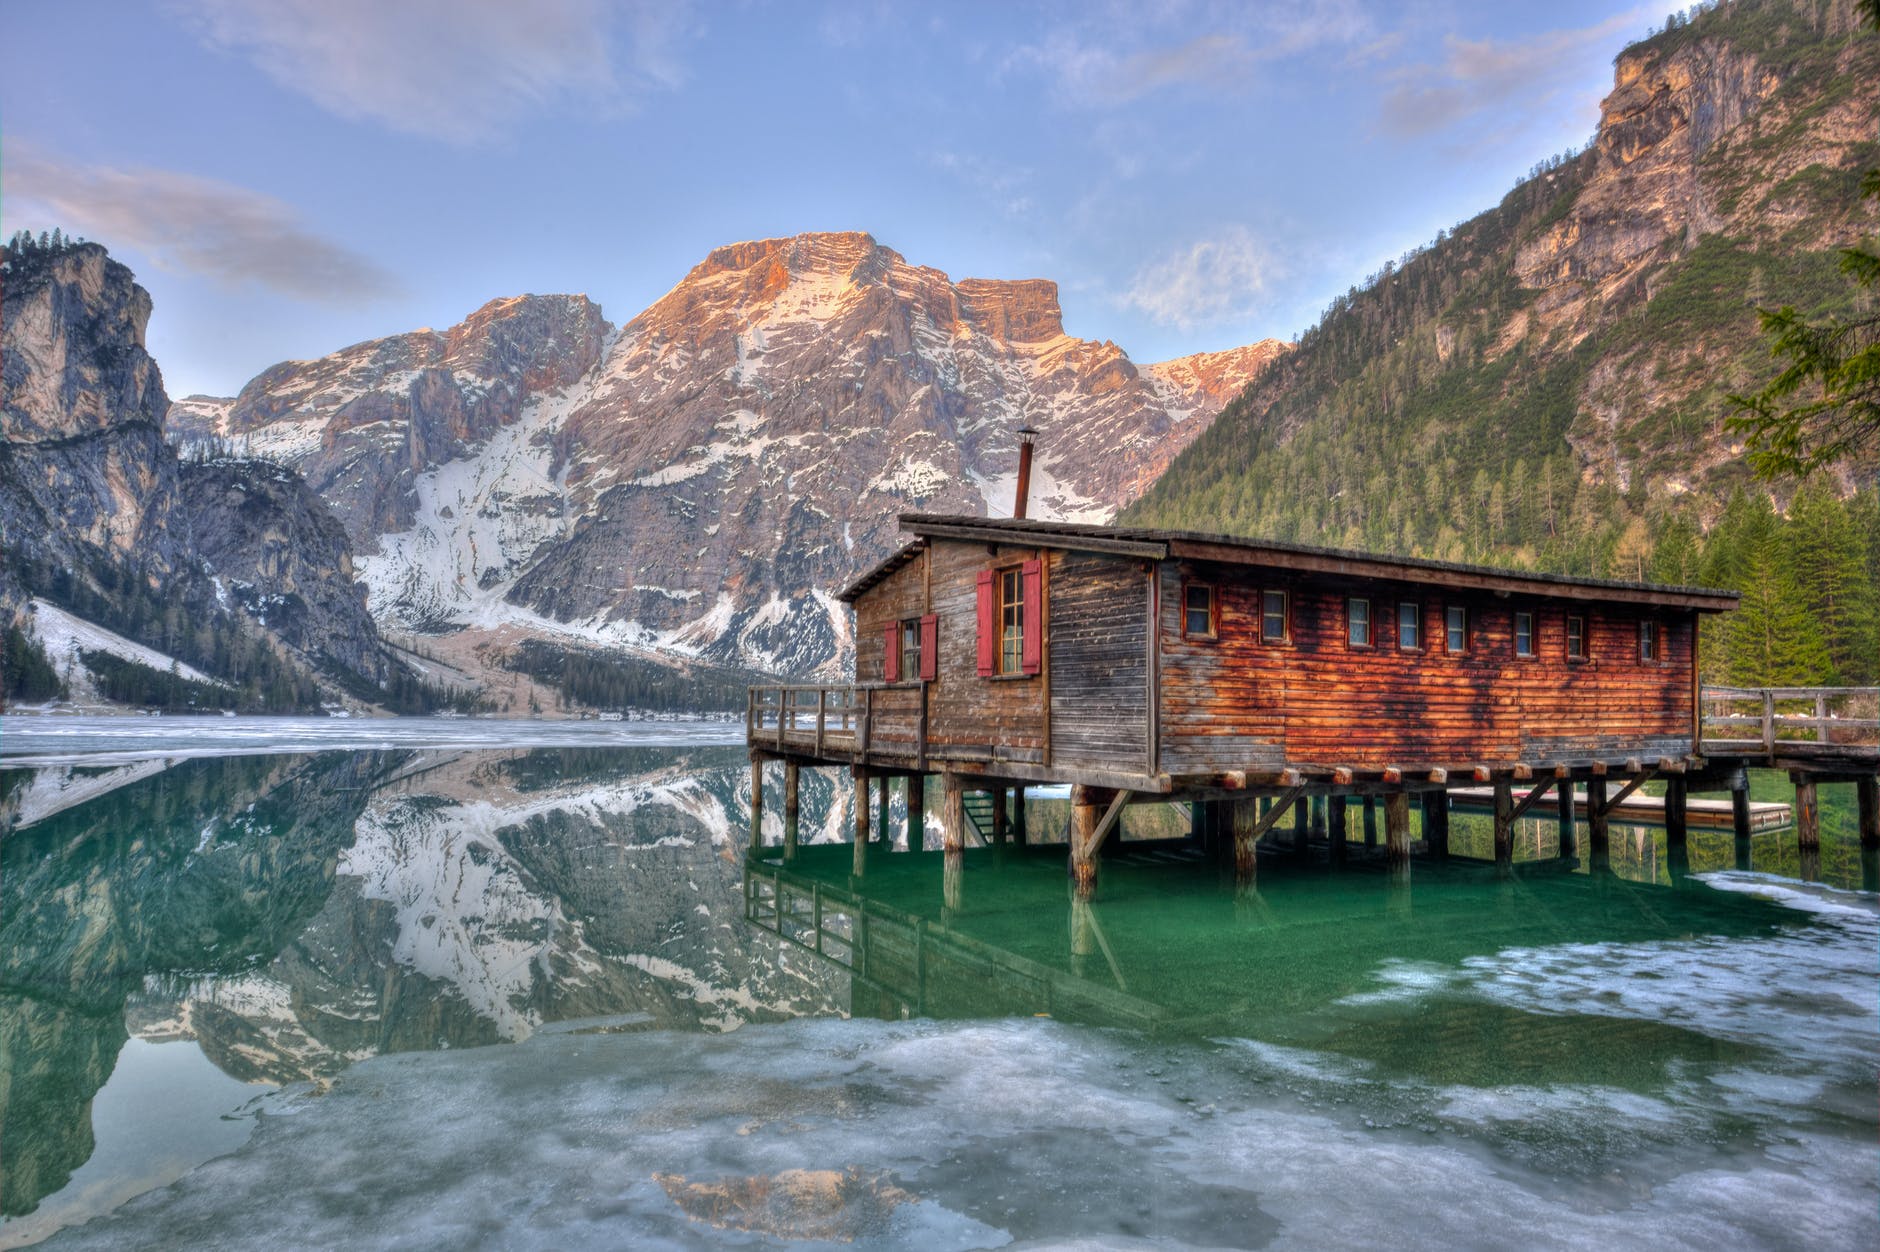 shack on body of water surrounded by mountains